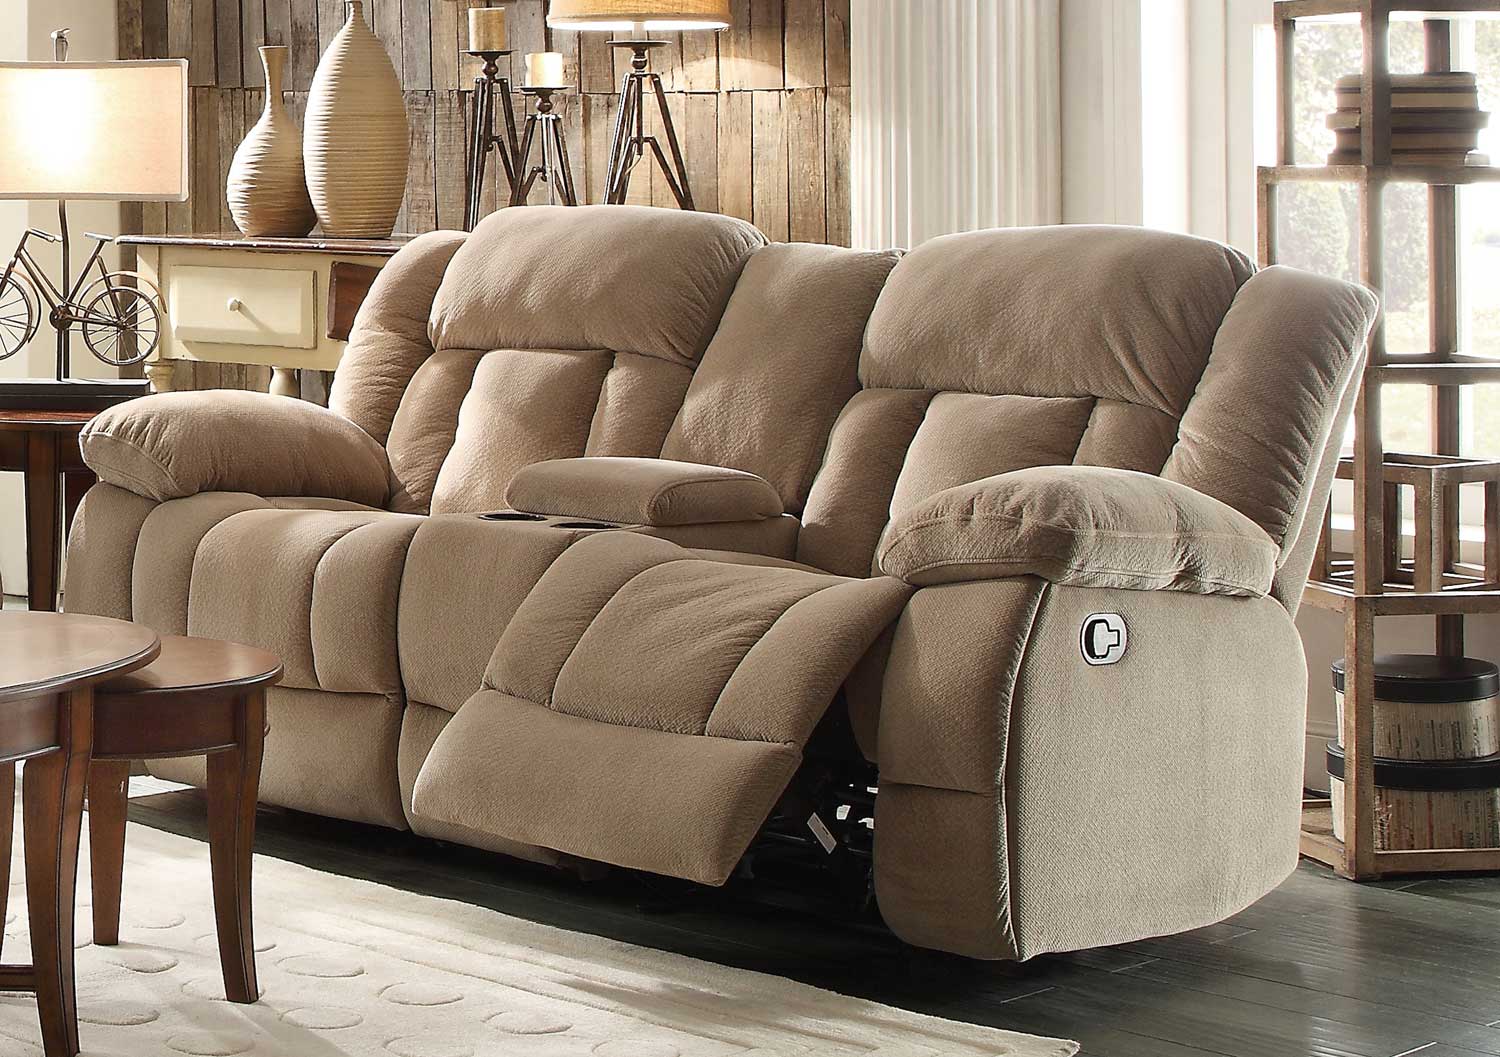 microfiber reclining loveseat with console homelegance laurelton double glider reclining love seat with center console LSRDUQC